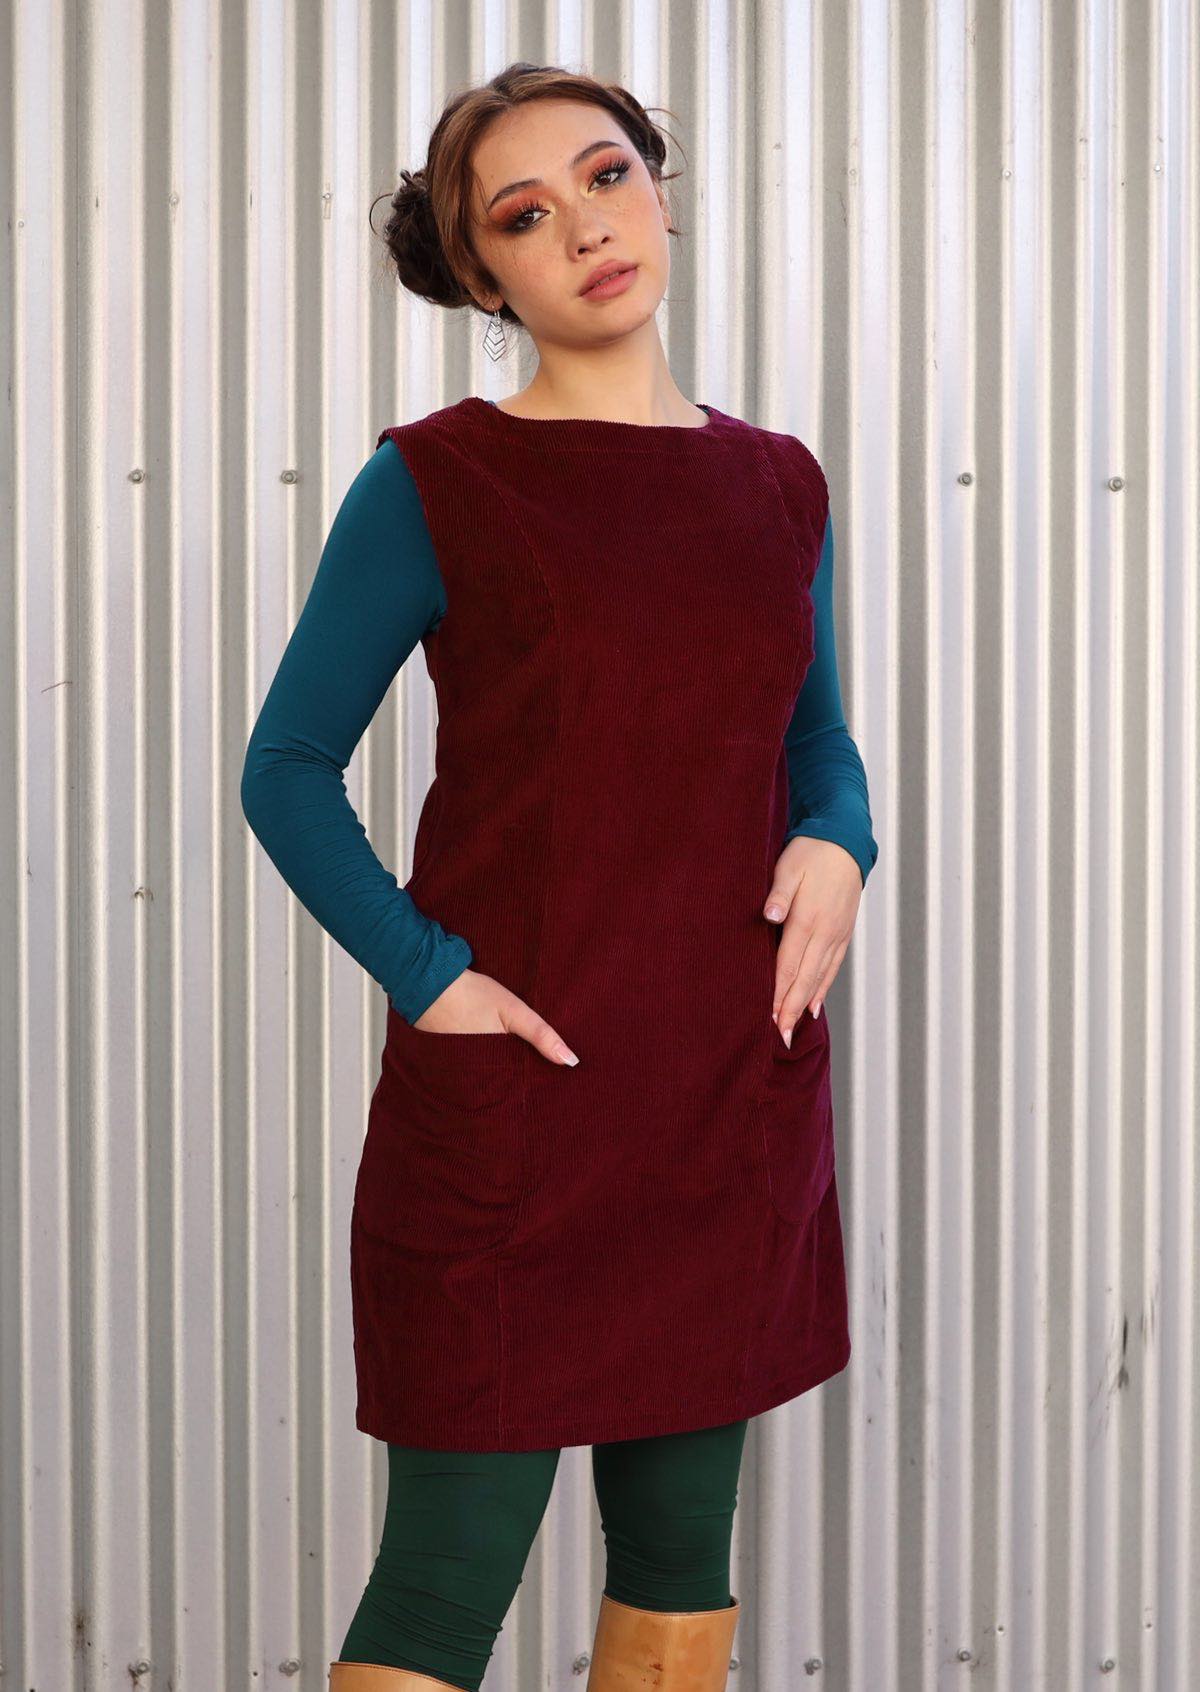 Corduroy tunic with shapely bodice and pockets